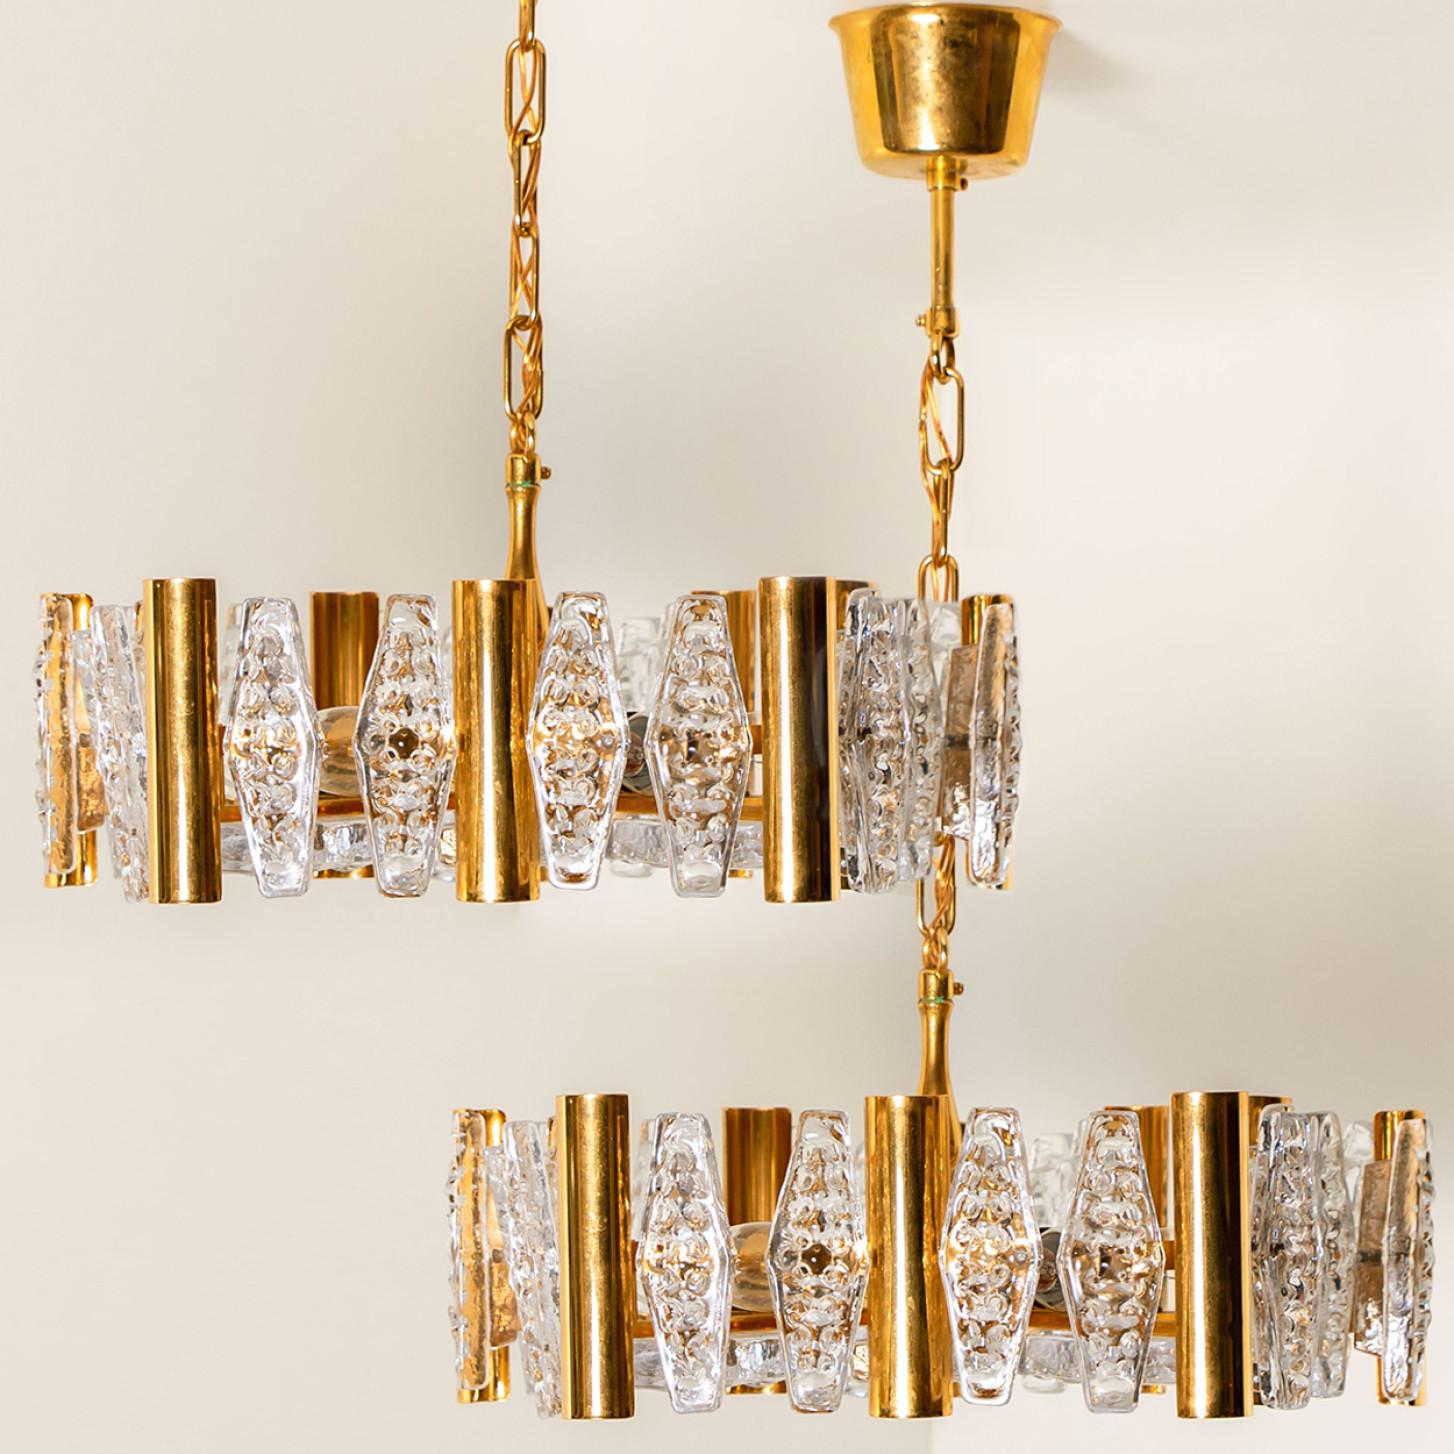 This stunning large pendant chandelier with 30 glass shades and brass details was produced in the 1960s by the iconic firm of Orrefors in Europe, Sweden. Around 1960. Beautifully carved clear frosted glass shades on brass fittings. The light bulbs